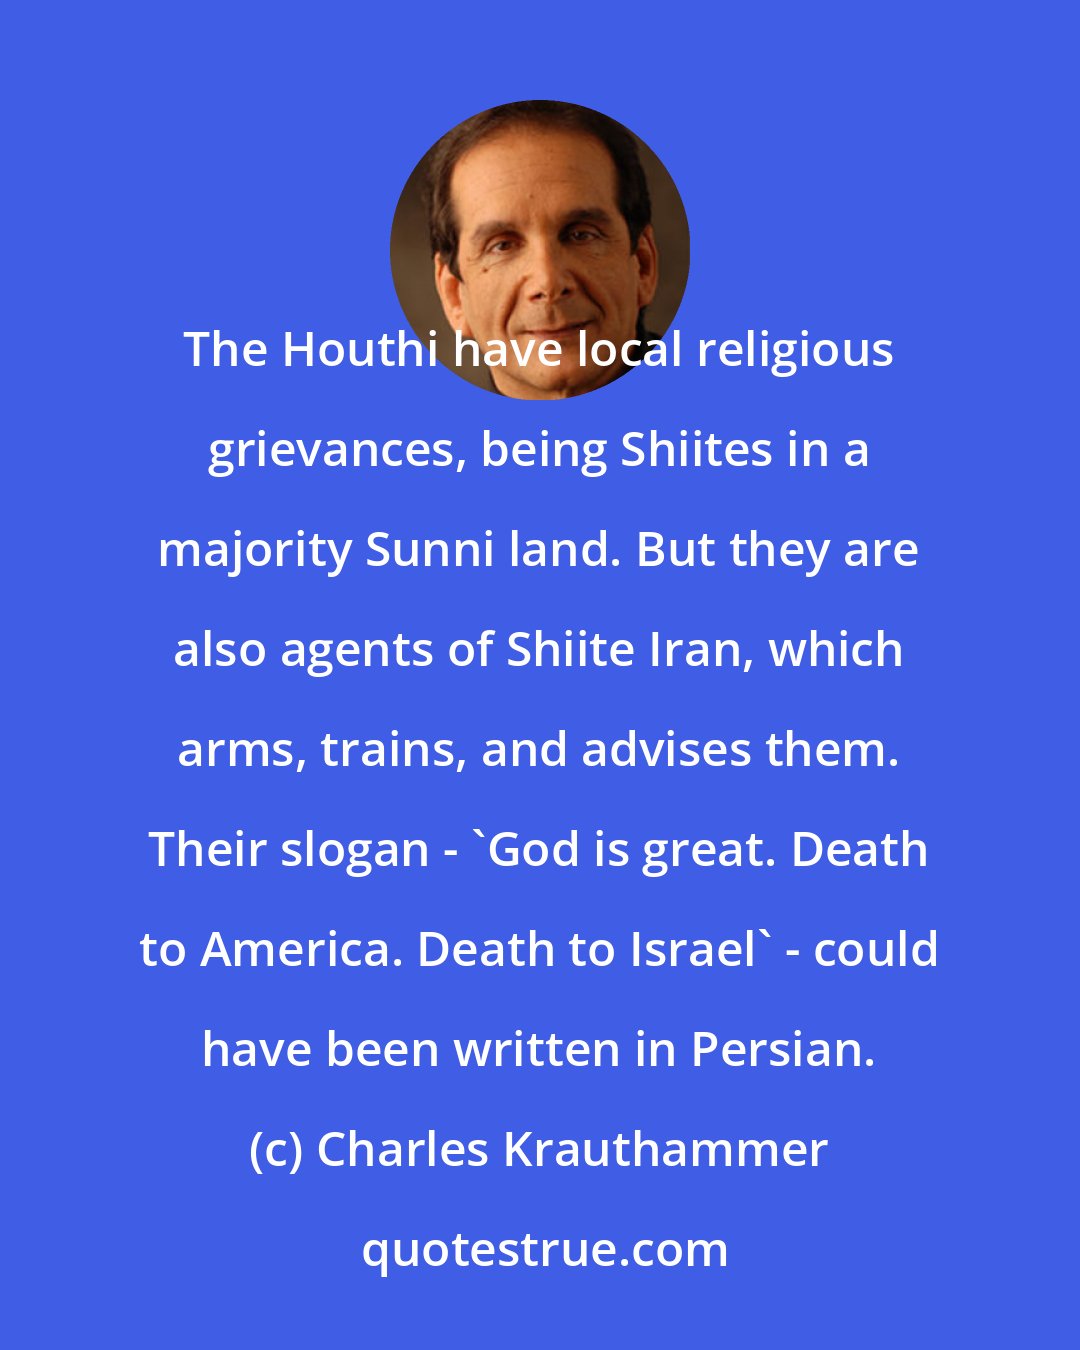 Charles Krauthammer: The Houthi have local religious grievances, being Shiites in a majority Sunni land. But they are also agents of Shiite Iran, which arms, trains, and advises them. Their slogan - 'God is great. Death to America. Death to Israel' - could have been written in Persian.